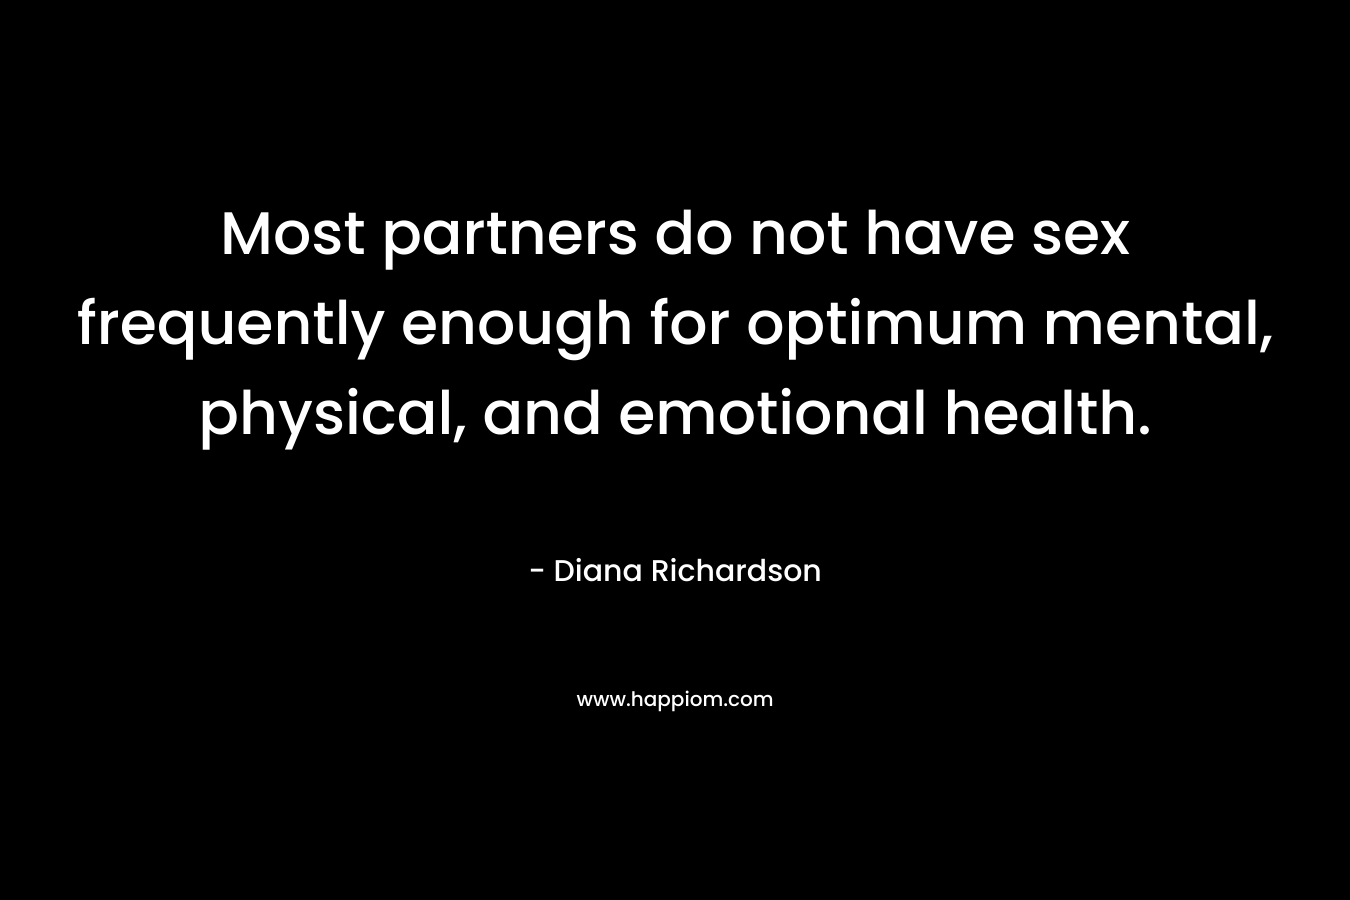 Most partners do not have sex frequently enough for optimum mental, physical, and emotional health. – Diana Richardson